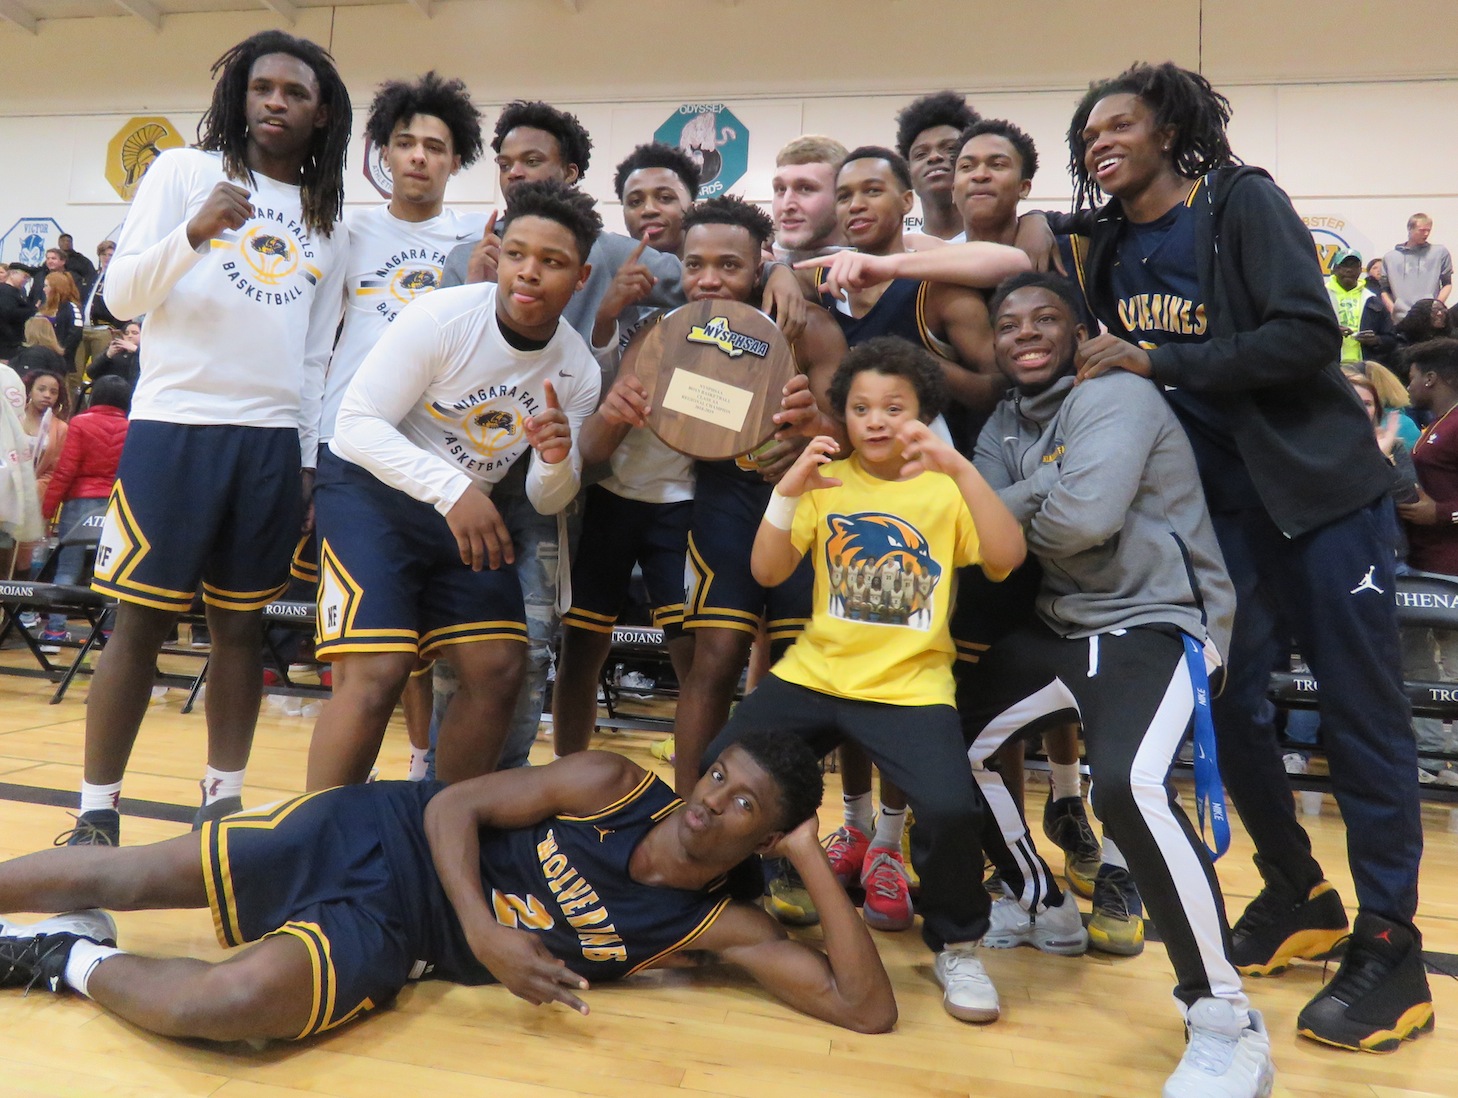 The Niagara Falls Wolverines pose following a Far West Regional victory over McQuaid. The win clinched the Wolverines' first state final four appearance in 10 years. (Photos by David Yarger)